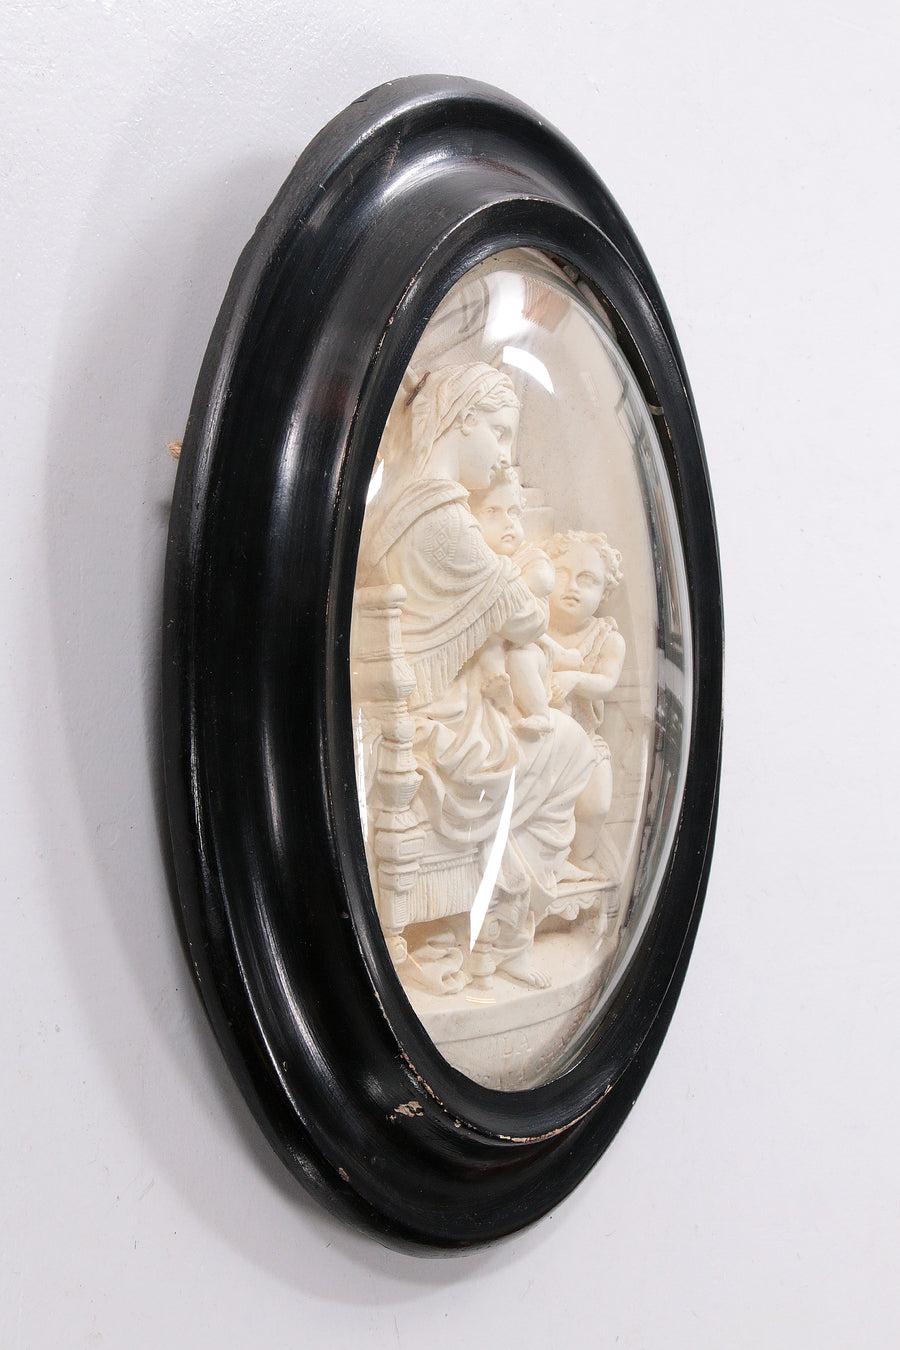 Old frame with meerschaum hand-carved Madonna and child, 1880 France

Statue in Oval Frame

This is a beautiful black frame made around 1880 with a beautiful carving in meerschaum (and soft rock).

The artwork is in excellent condition and could